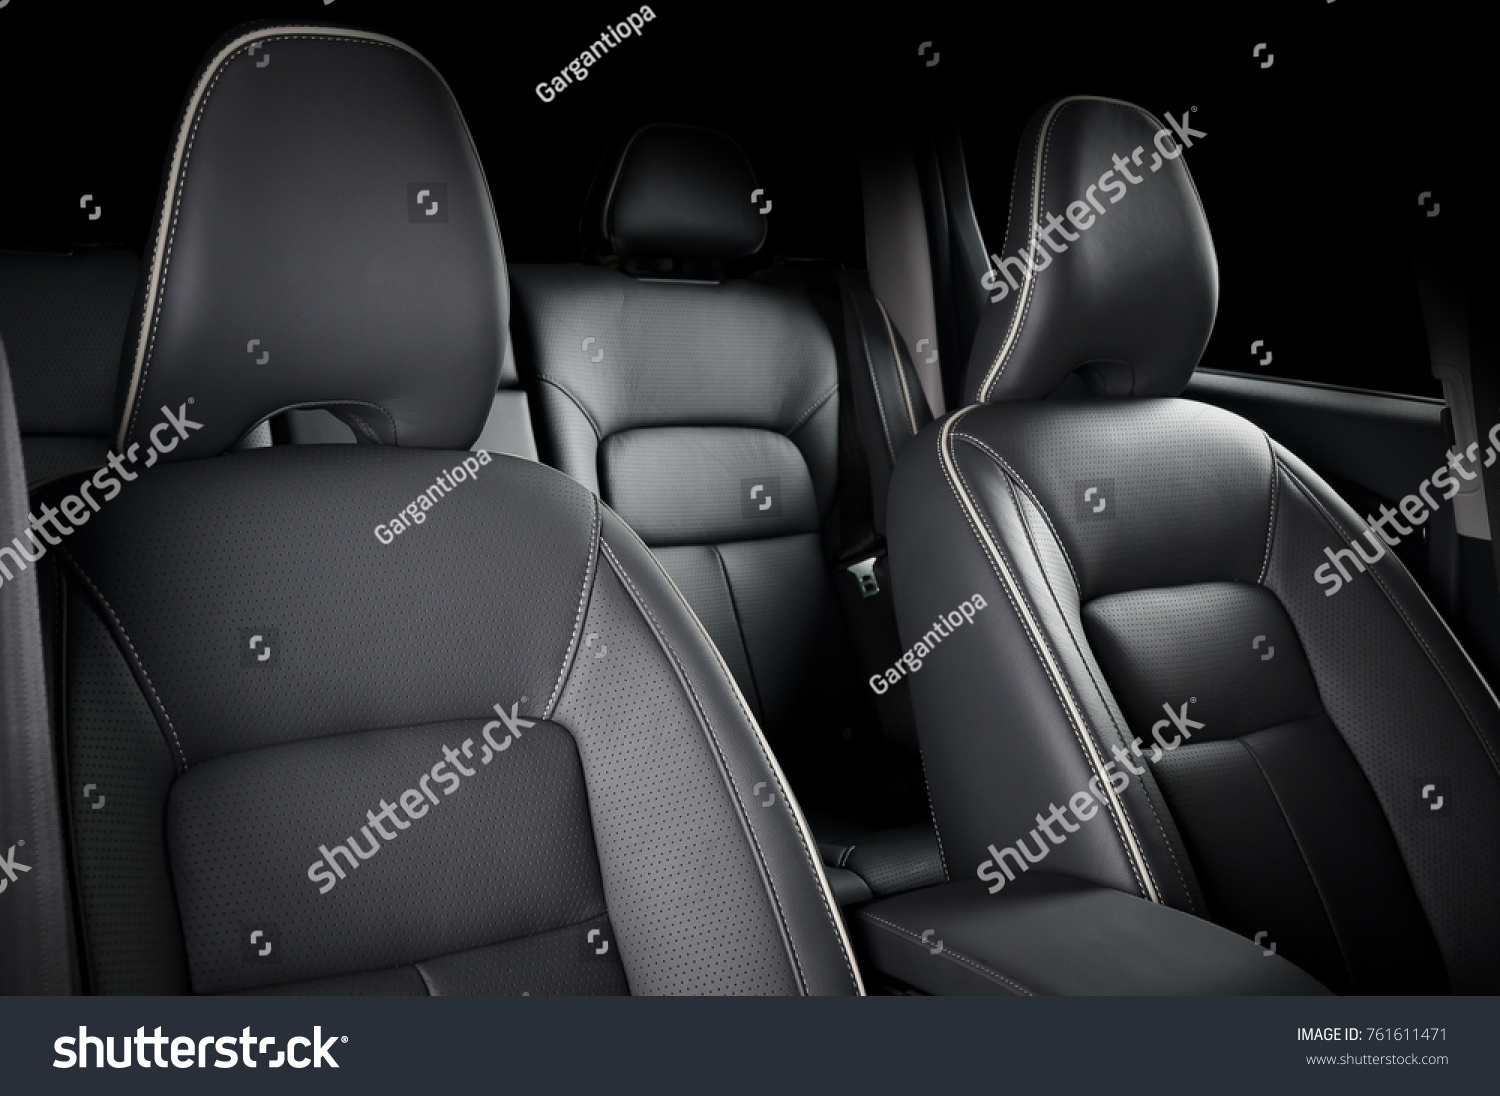 Luxury car inside. Interior of prestige modern car. Comfortable leather seats. Black perforated leather cockpit. #761611471